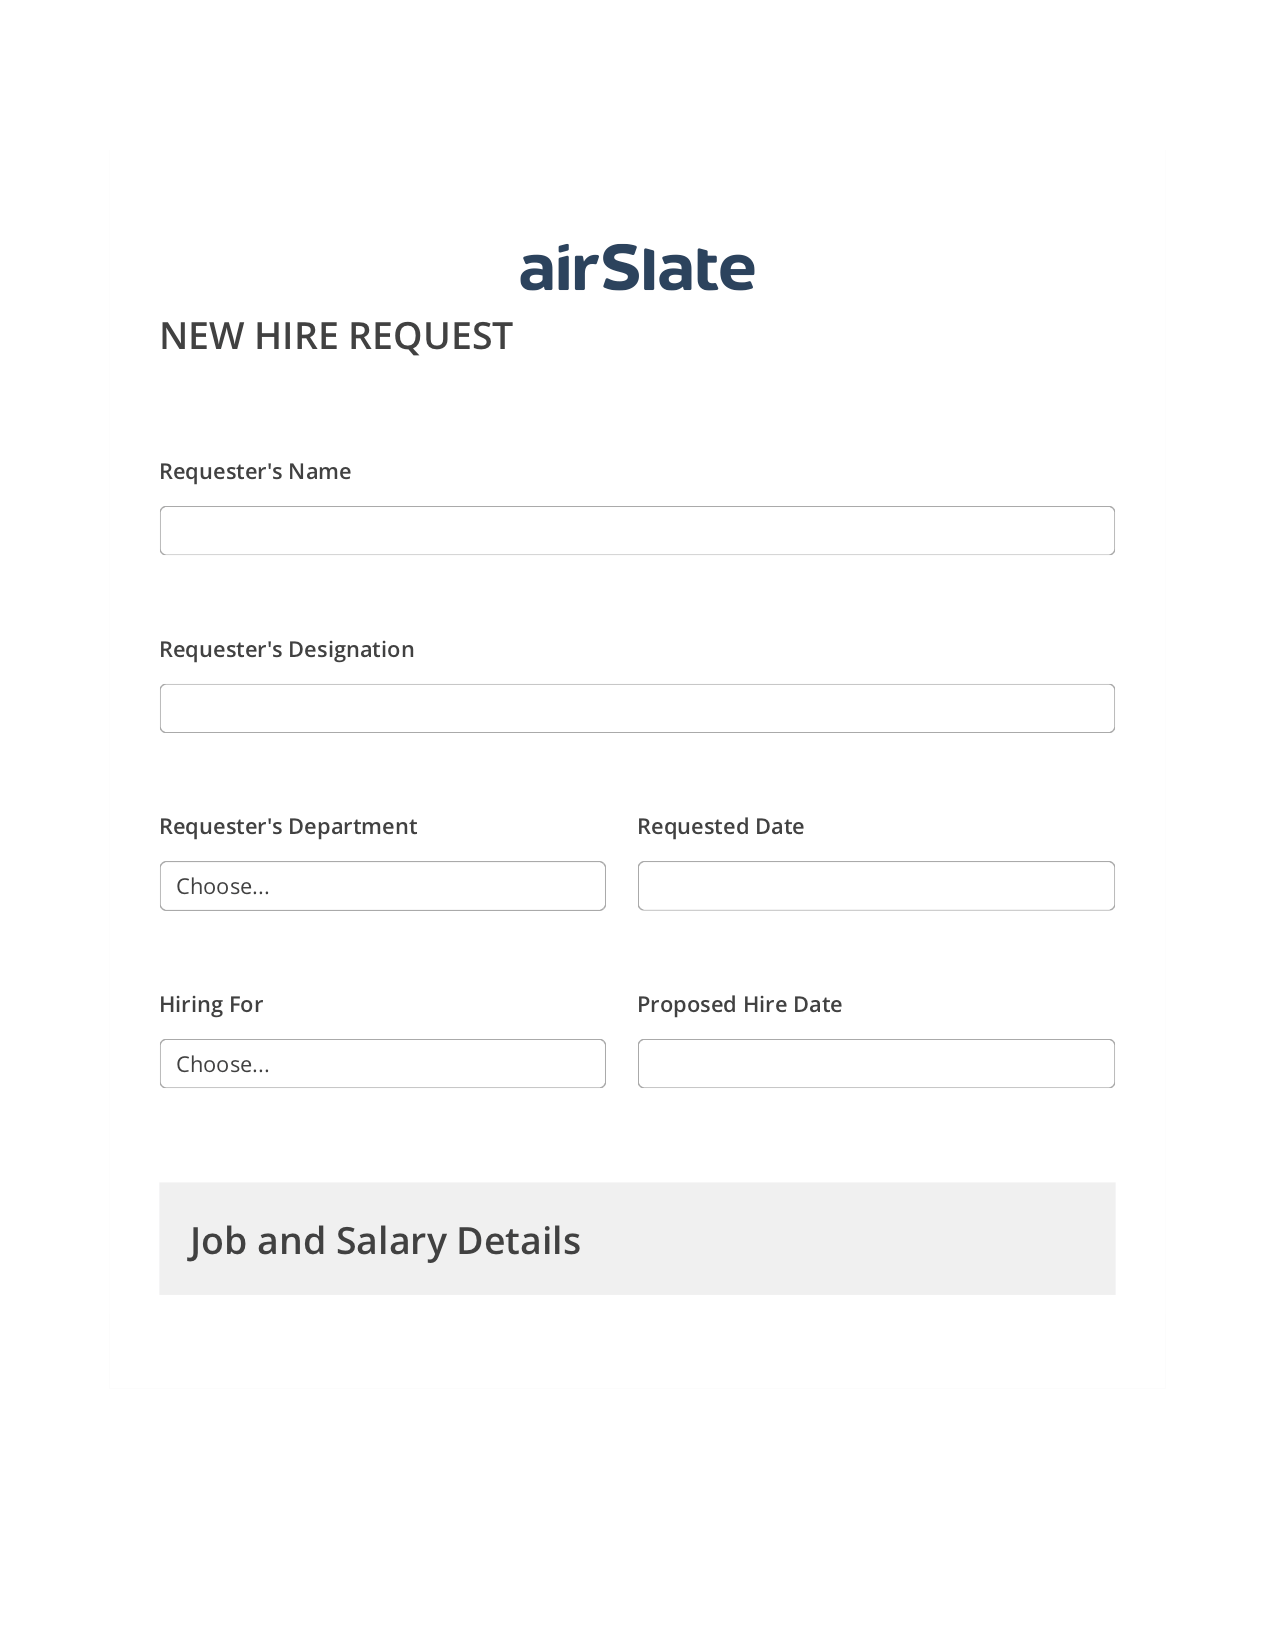 Multirole Hiring Request Workflow Pre-fill from Google Sheets Bot, Create NetSuite Record bot, Export to Google Sheet Bot